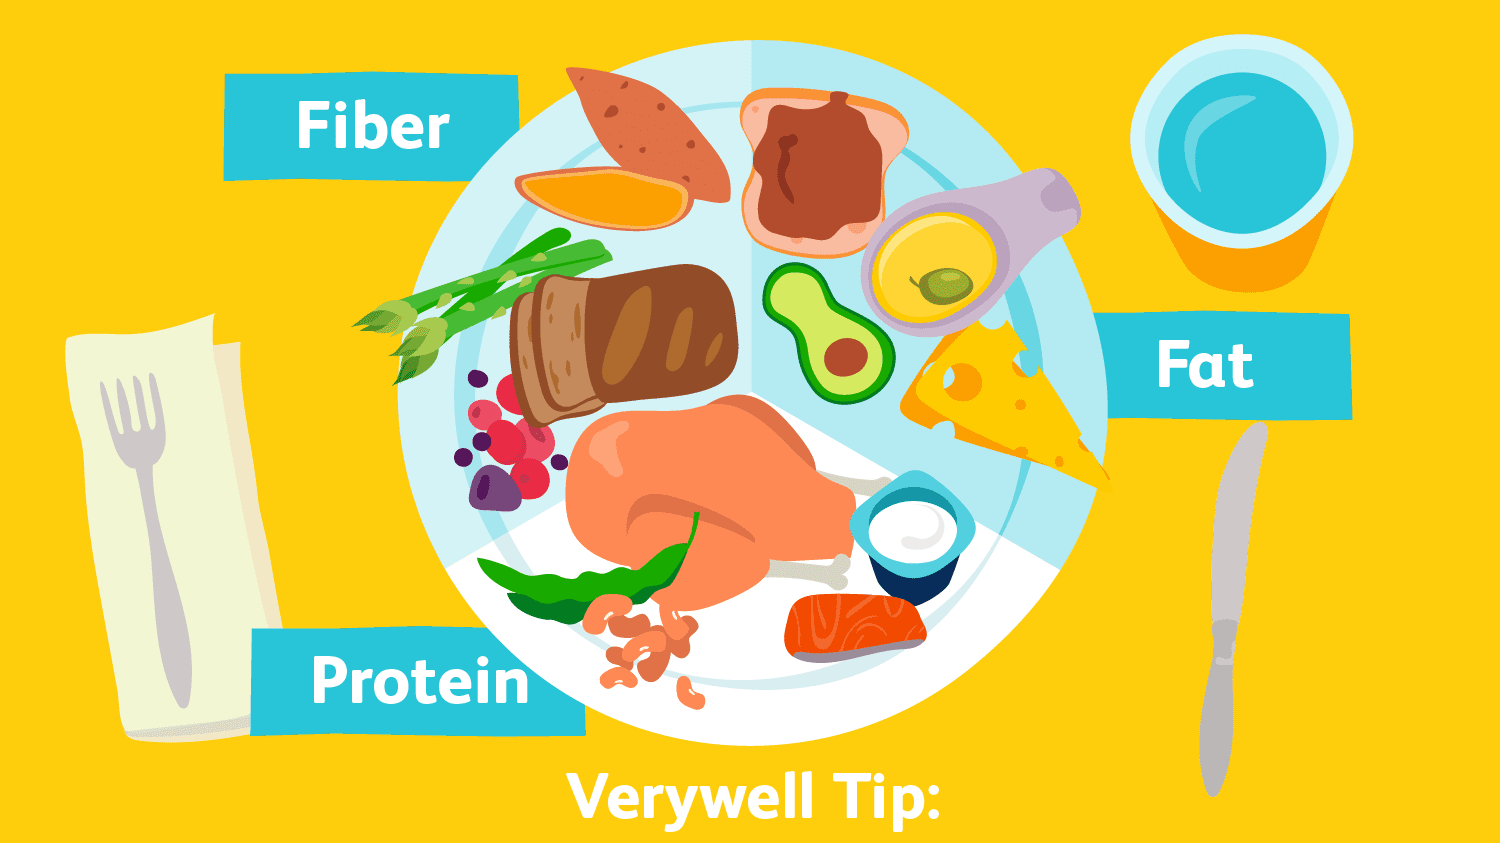 A NUTRITIONIST SHARES FULL-DAY MEAL CHART FOR WHEN YOU TAKE YOUR COVID VACCINE!